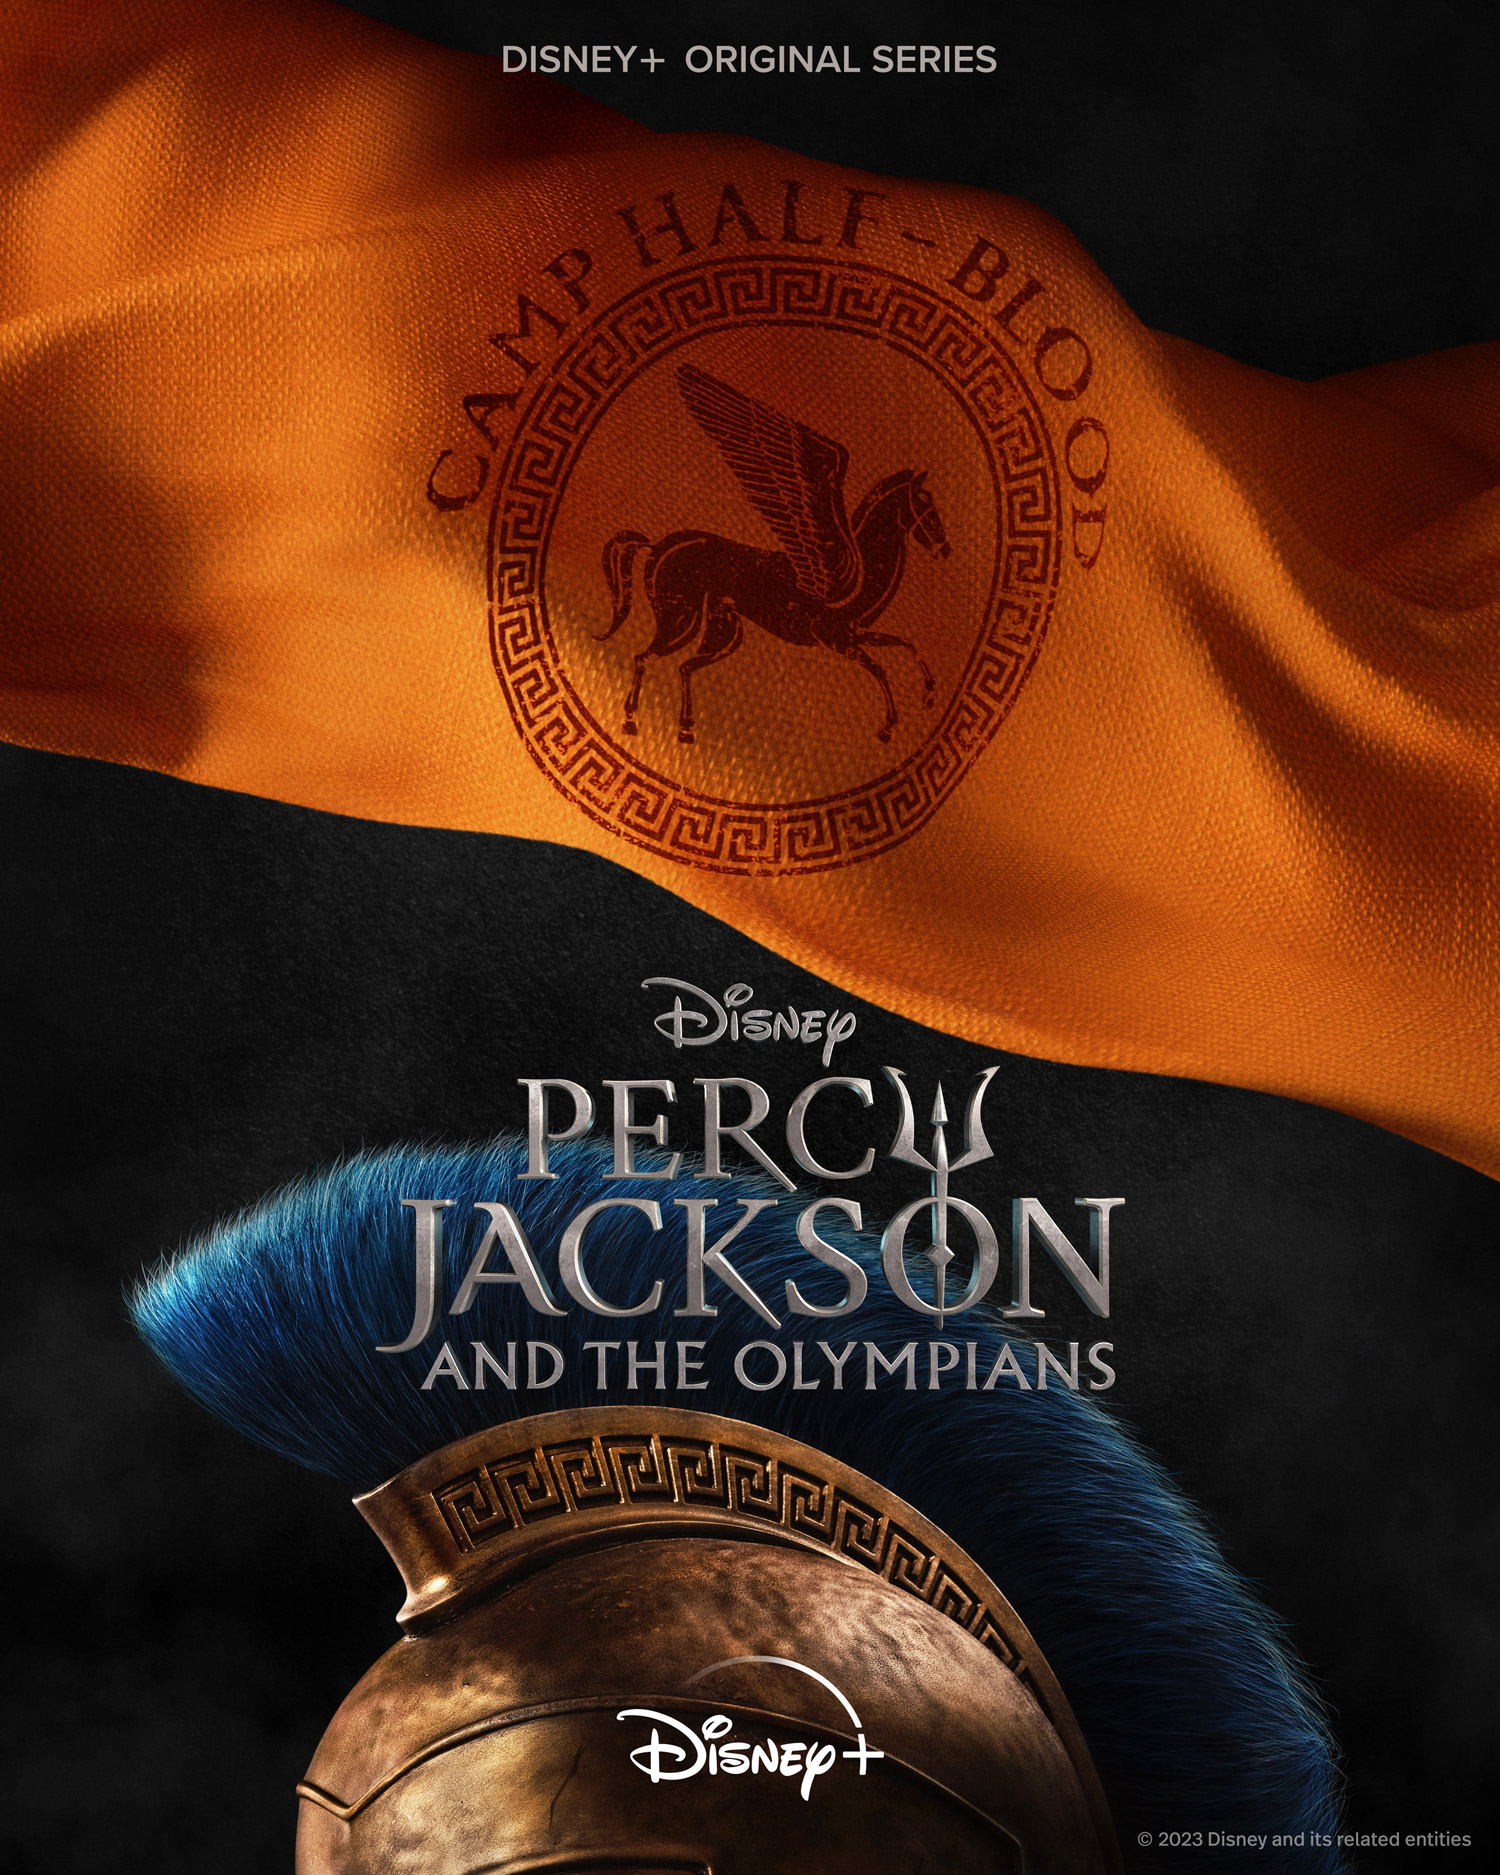 Poster internazionale Percy Jackson and the Olympians (disney plus)